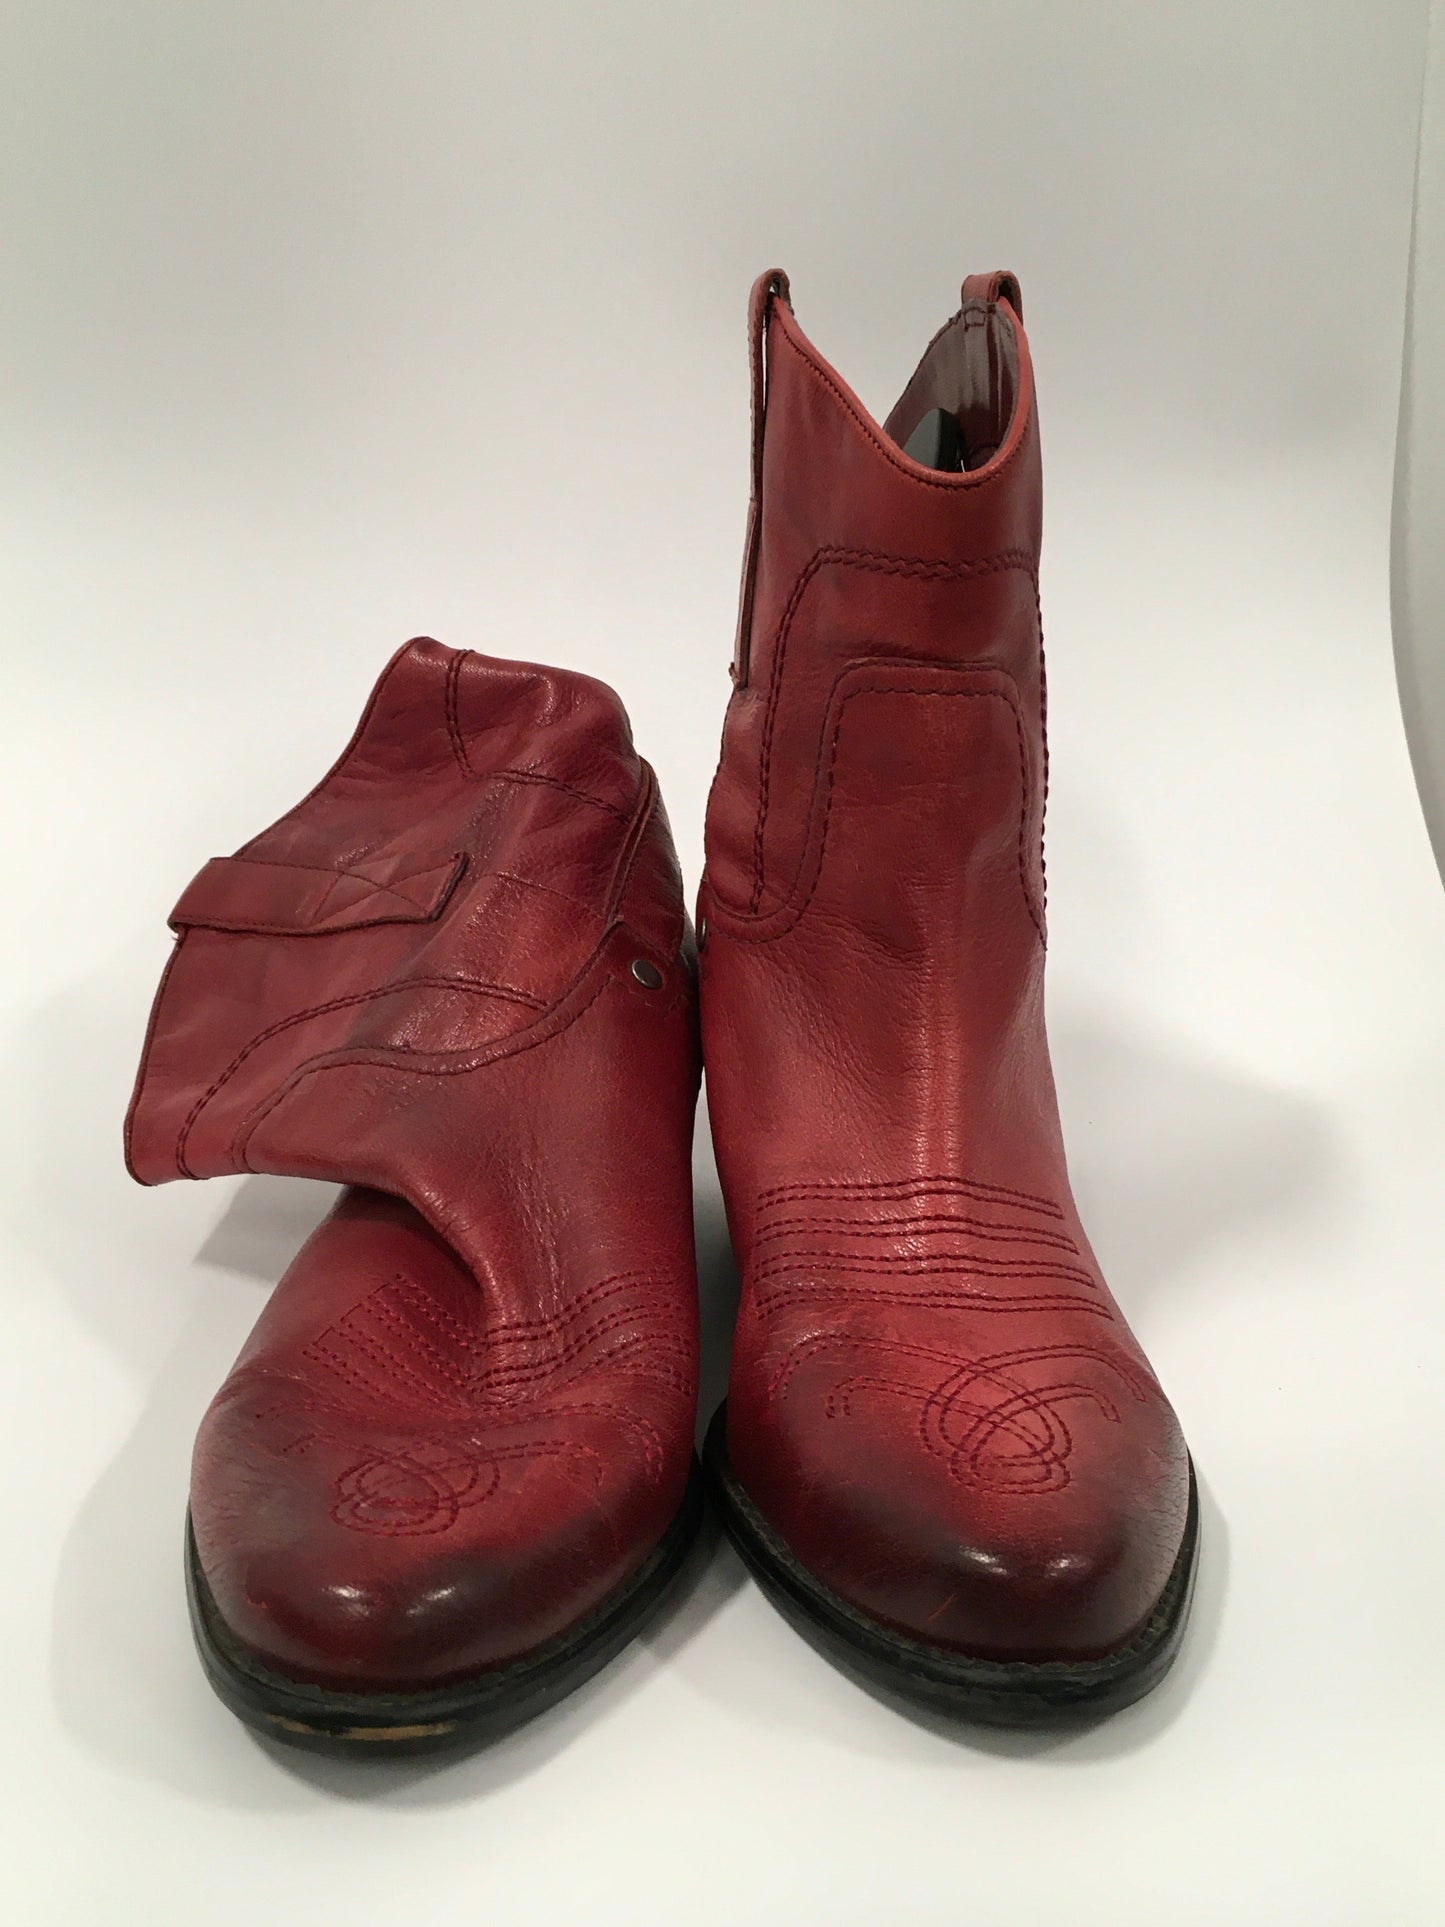 Red Boots Ankle Flats Franco Sarto, Size 8